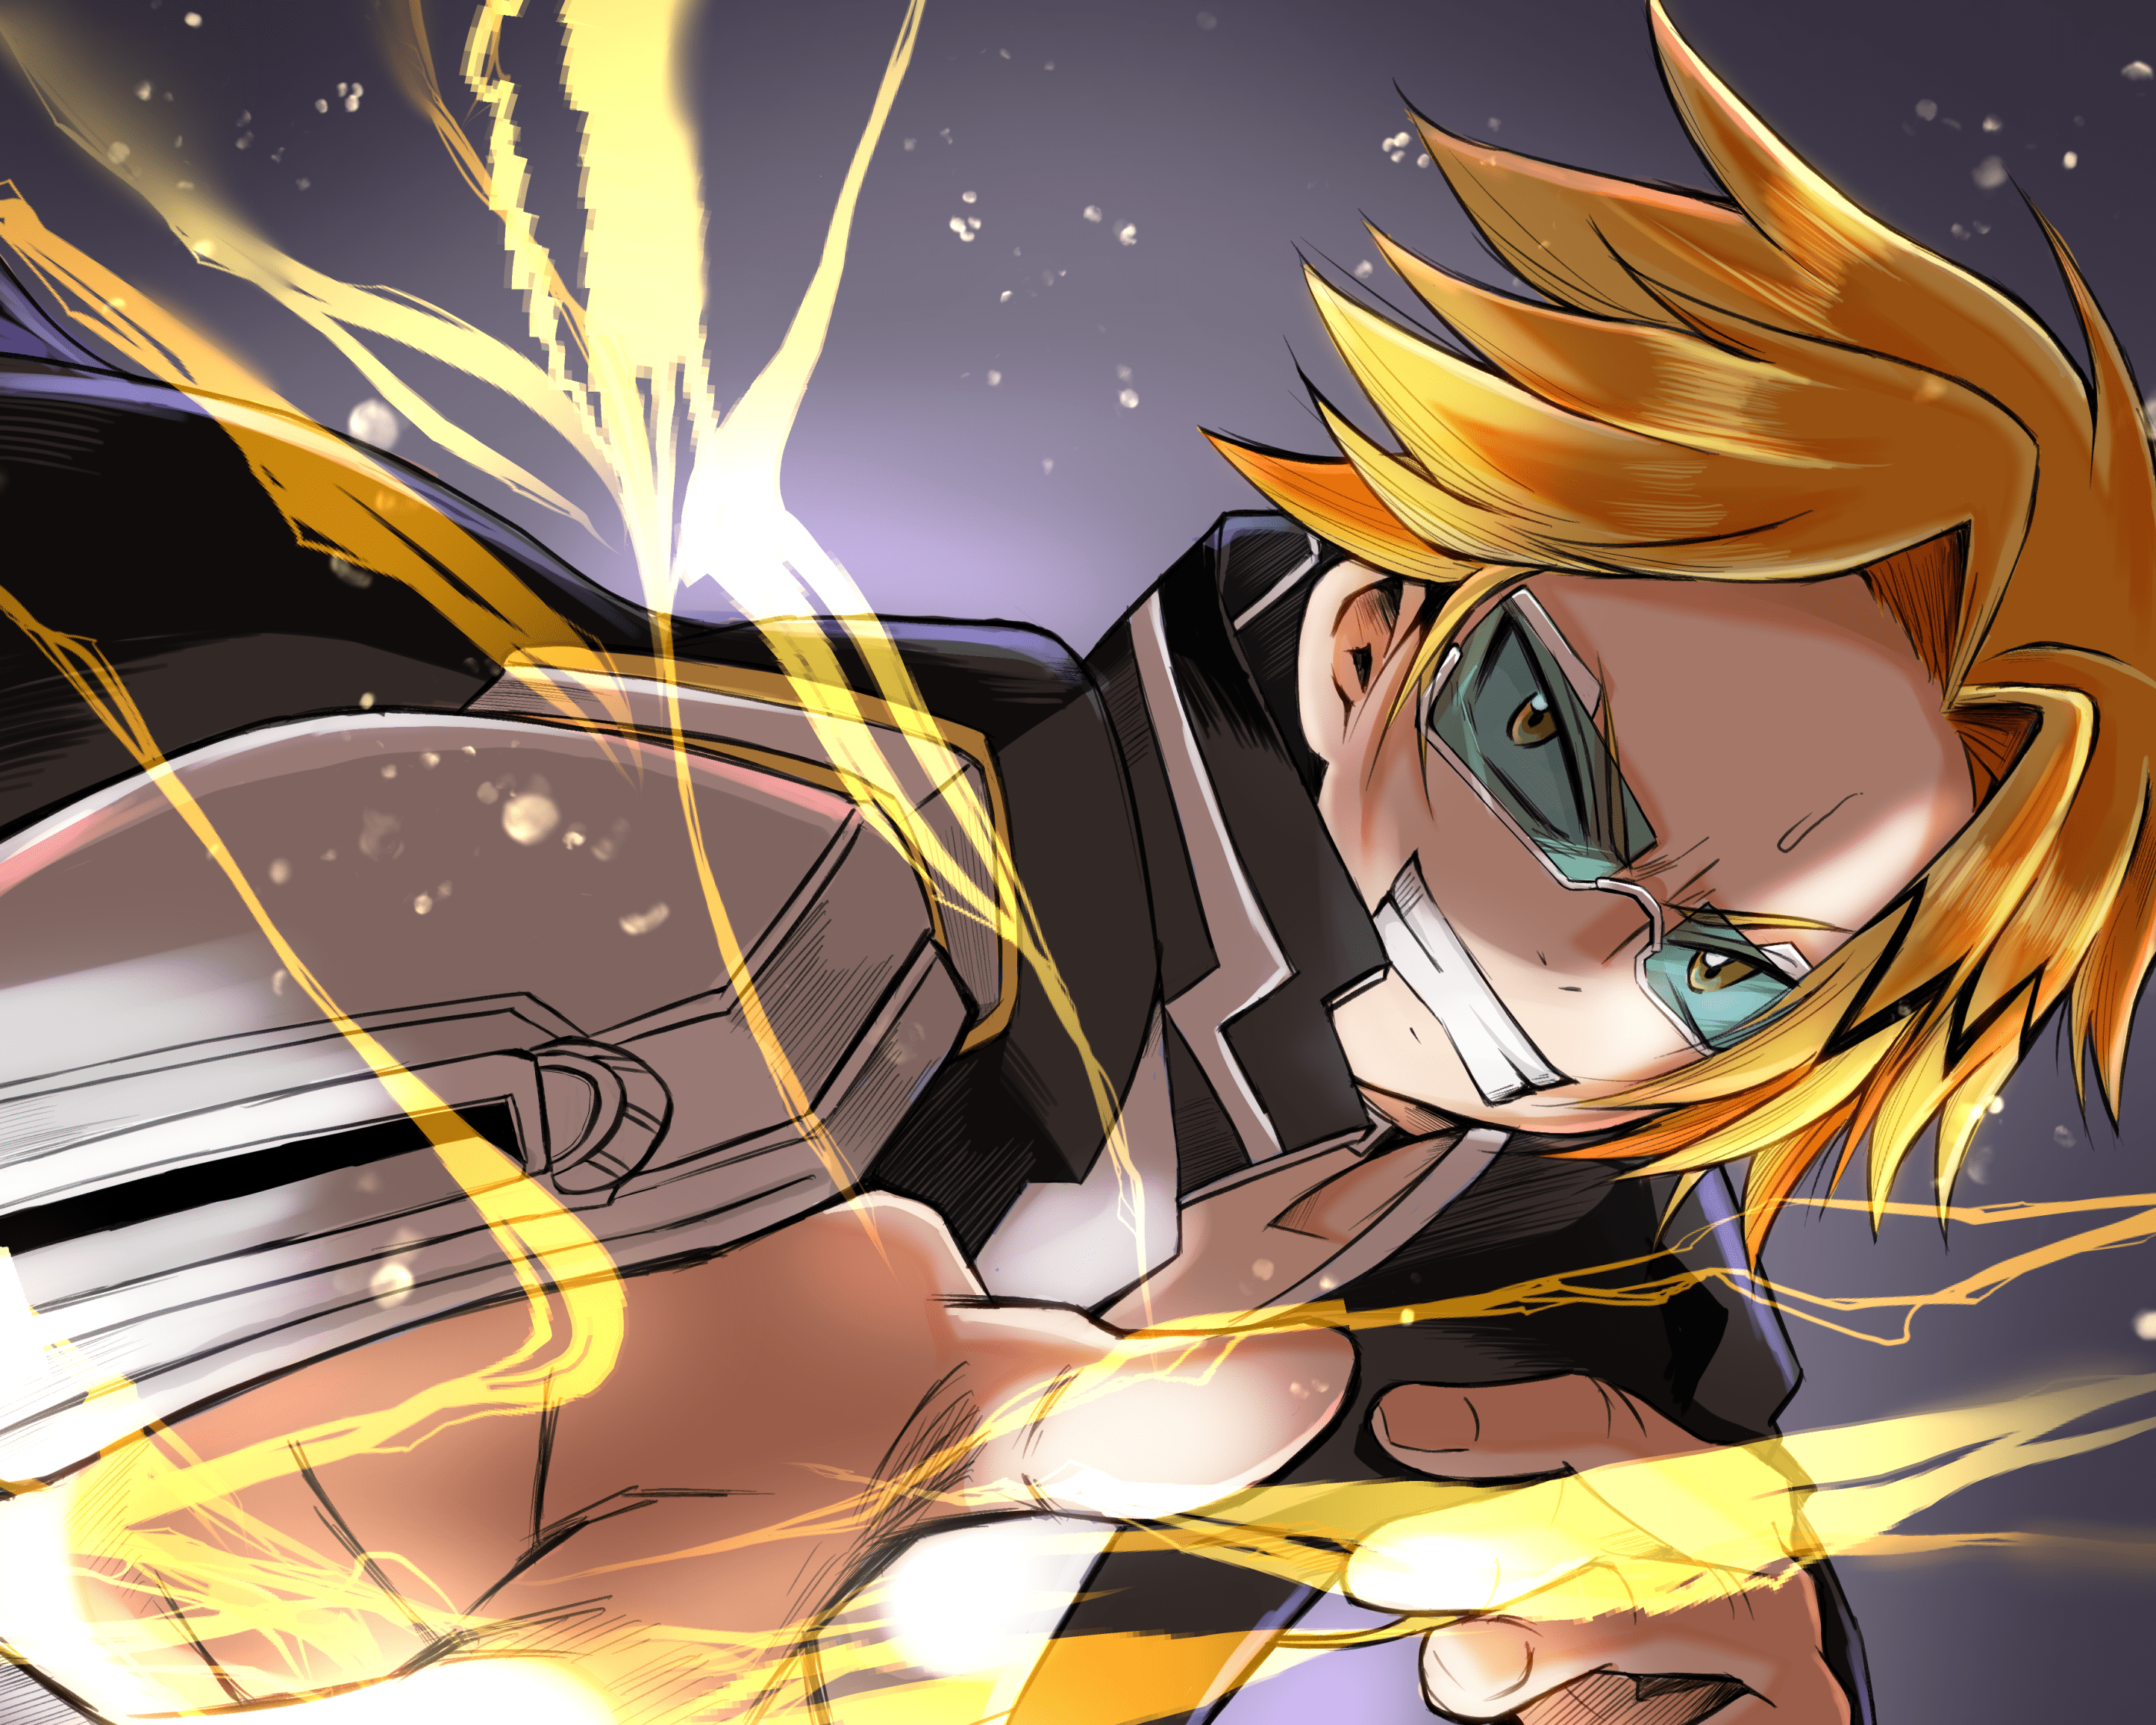 A blonde man with a white shirt and black jacket is using his powers to shoot yellow electricity from his hands. - Denki Kaminari